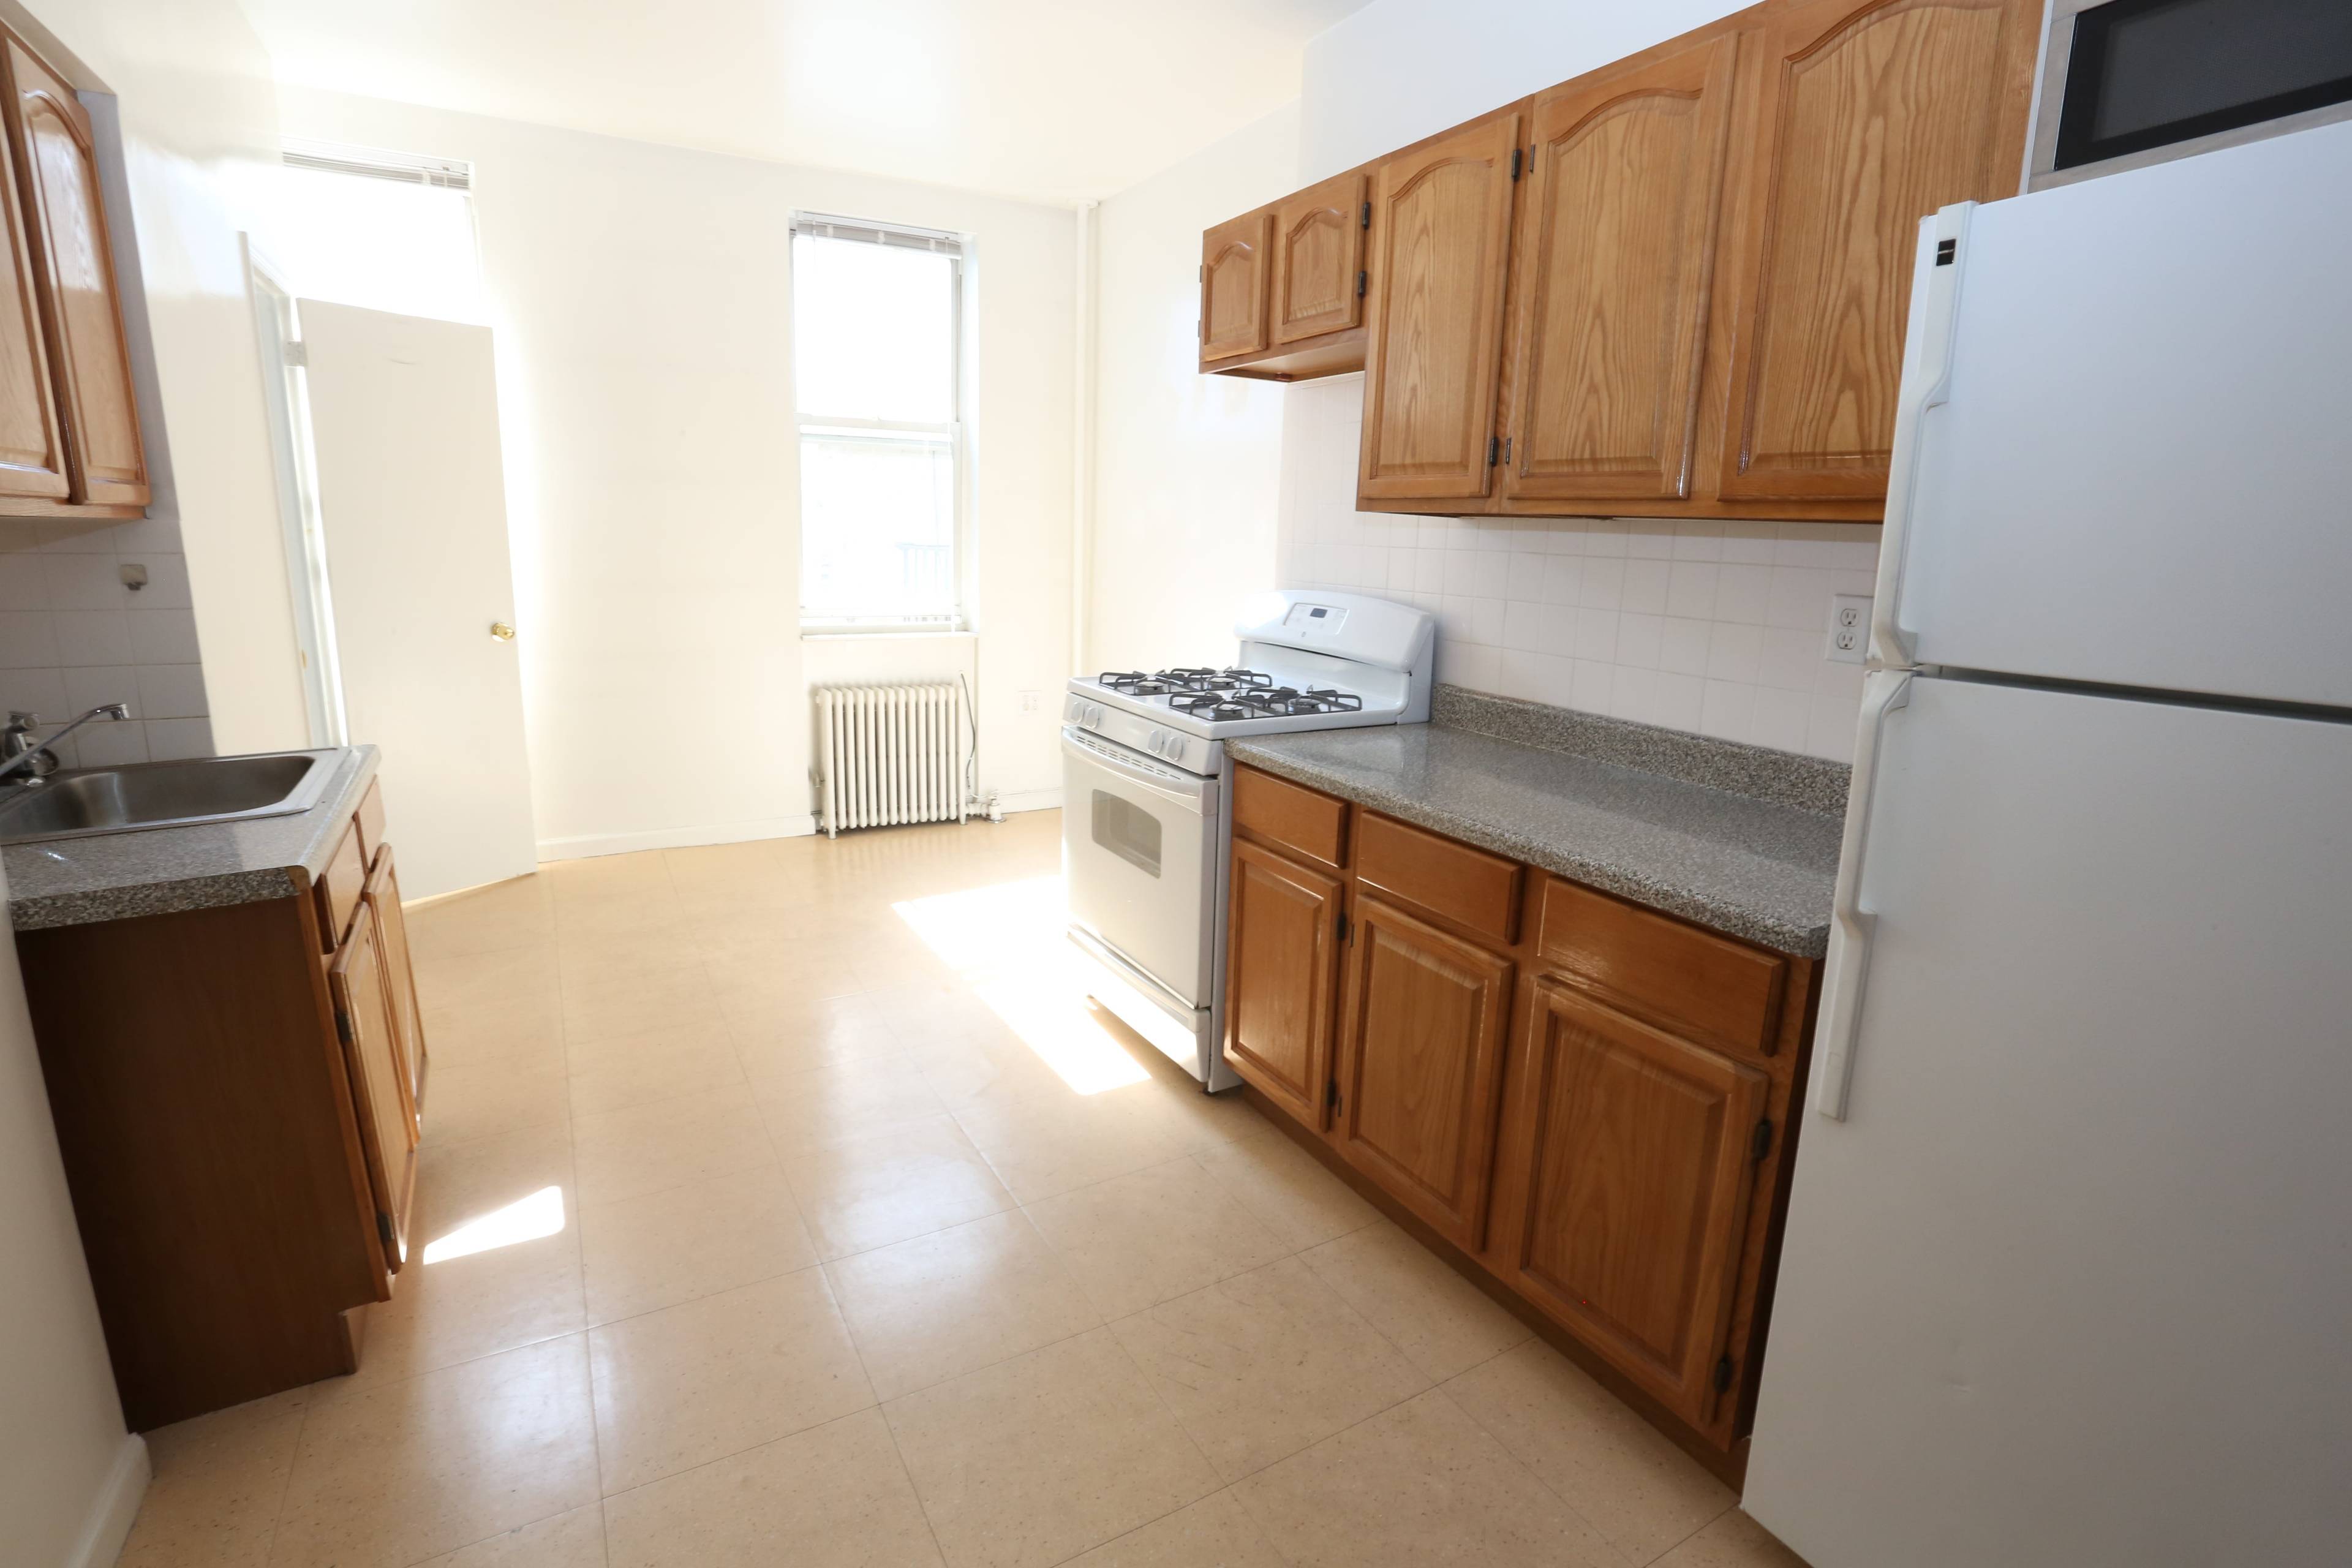 Amazing 1 Bedroom with Home Office on Trendy Franklin Street - Greenpoint Waterfront!!